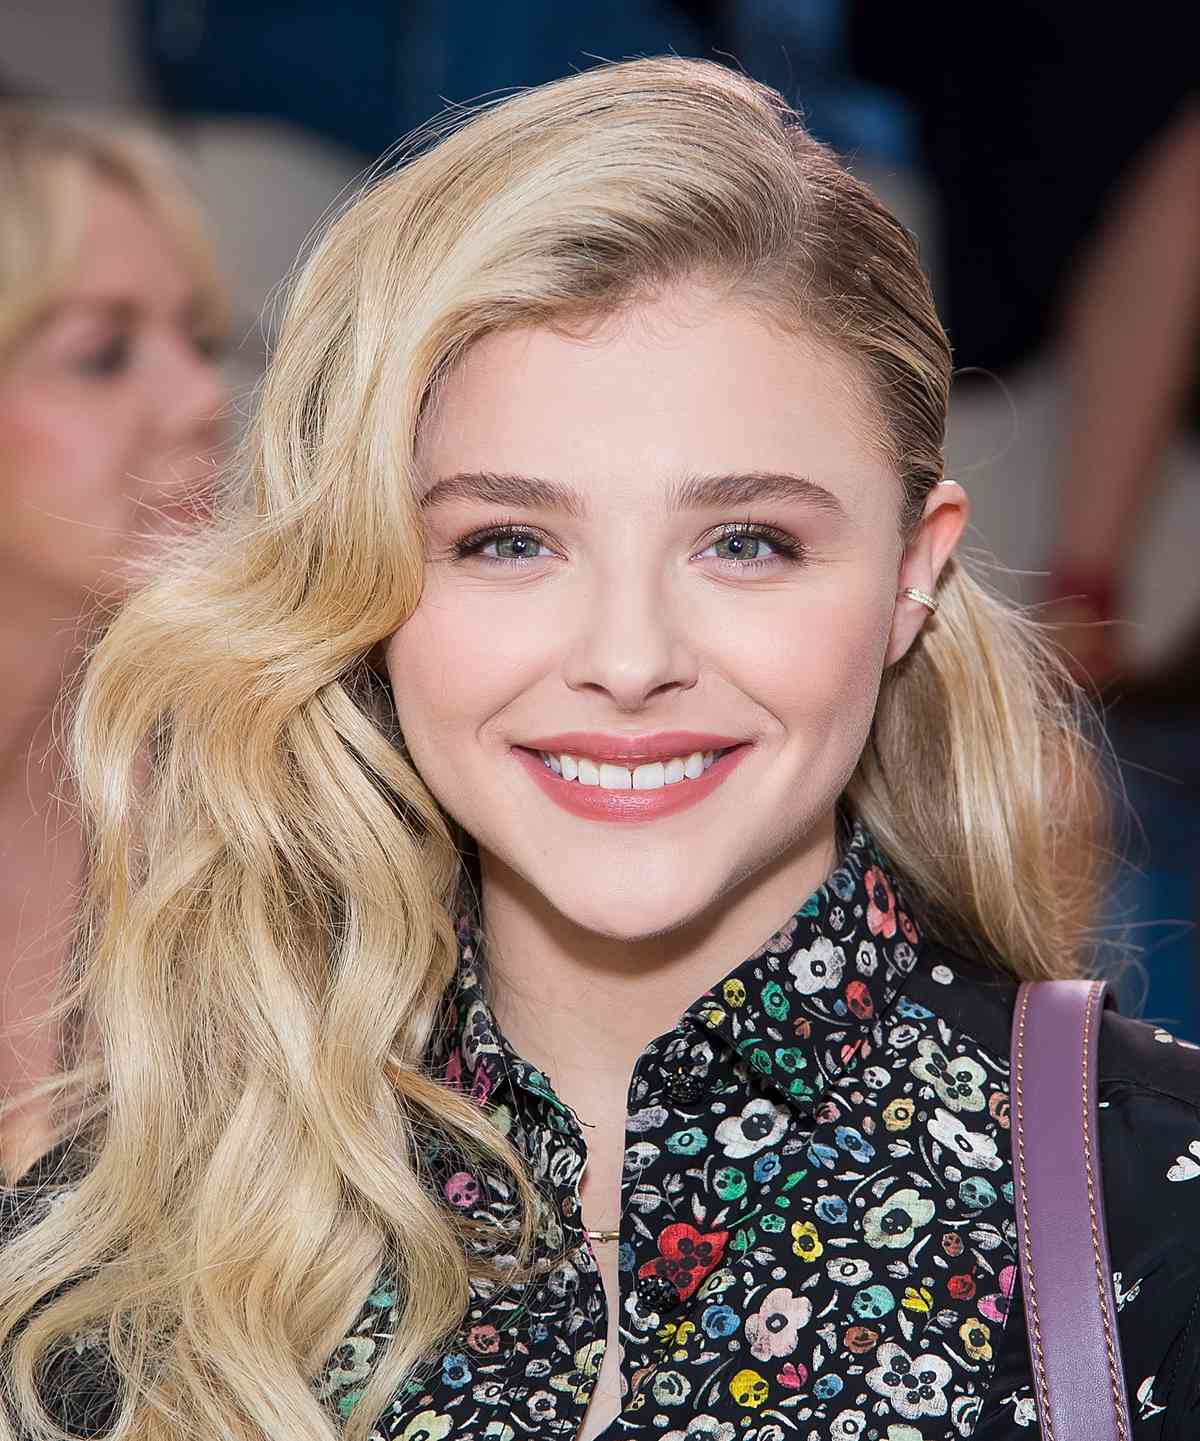 Actress Chloe Grace Moretz attend the Coach presentation during Spring 2016 New York Fashion Week on September 15, 2015 in New York City.